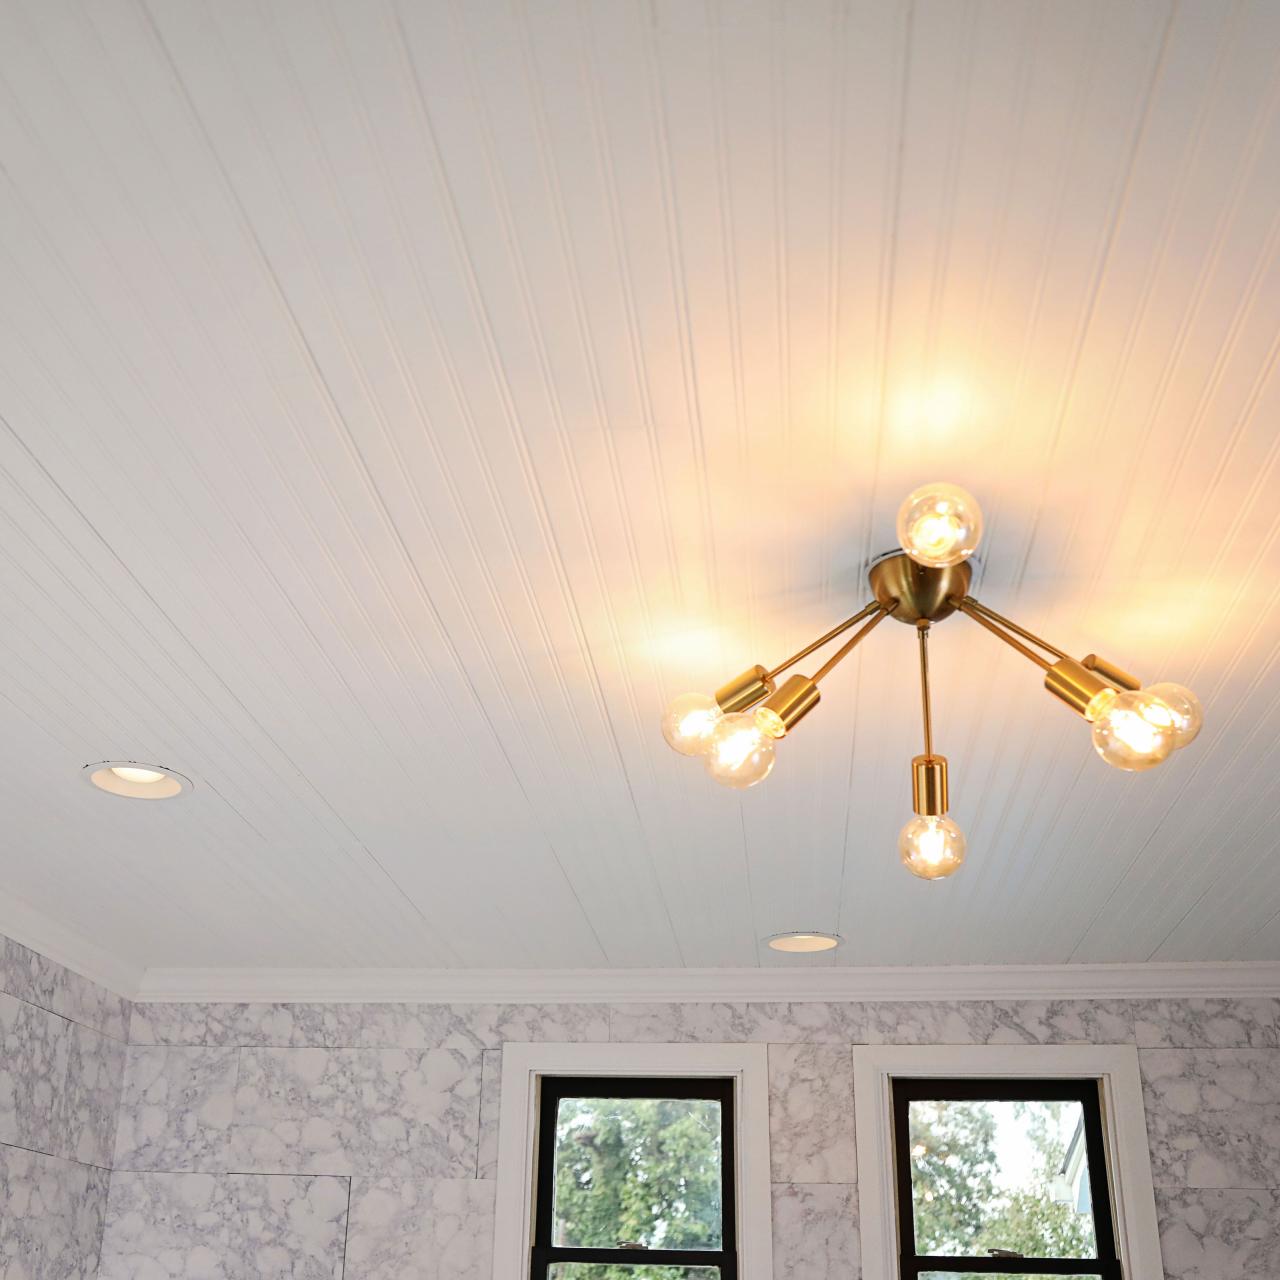 Drop Ceiling With Beadboard Paneling